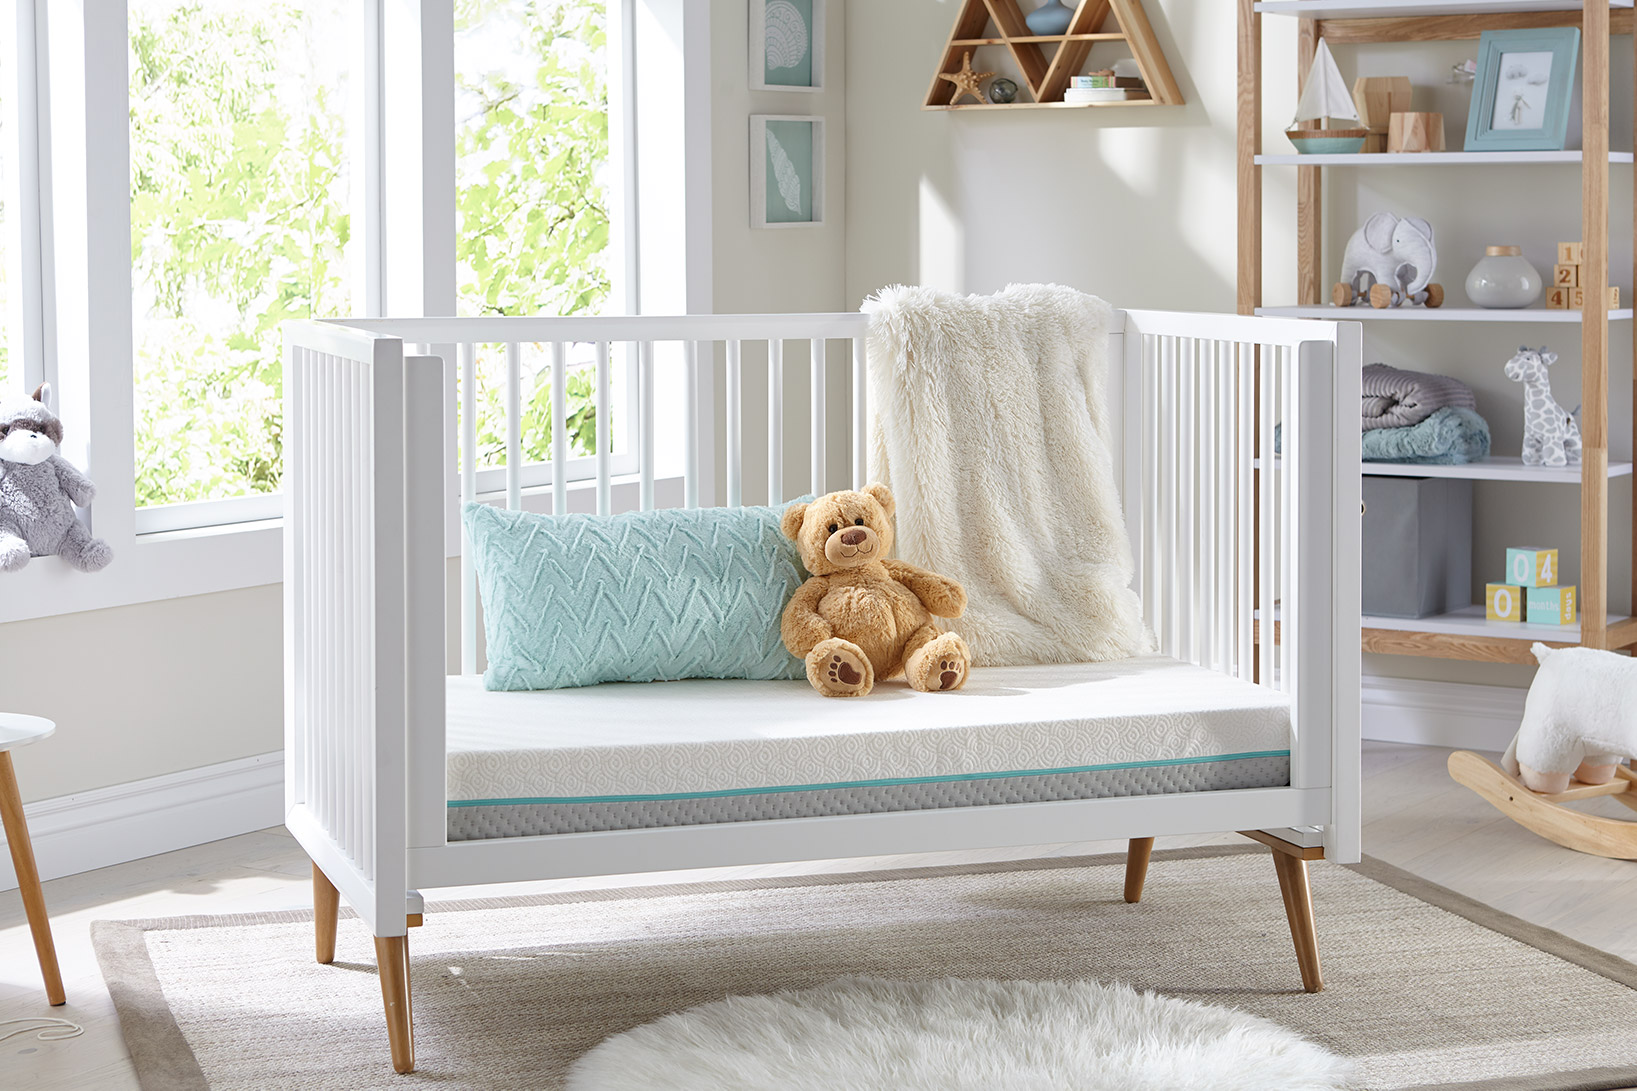 convertible baby beds